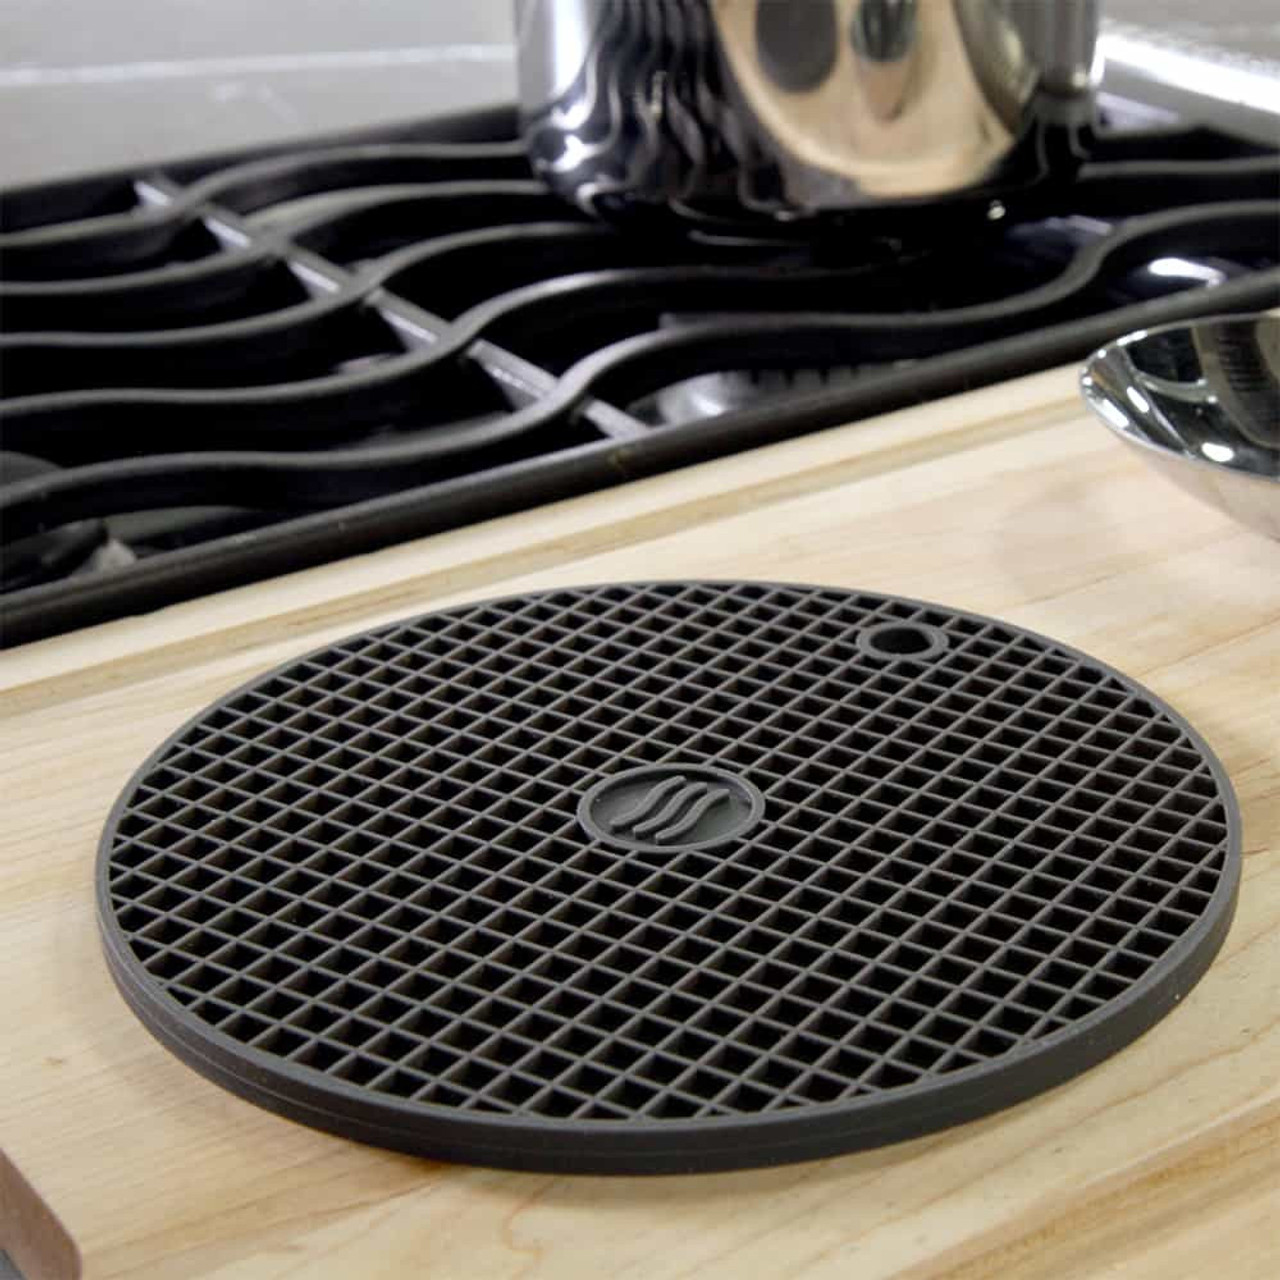 Joie Folding Silicone Trivet - Non Slip Heat Resistant Hot Pad Table